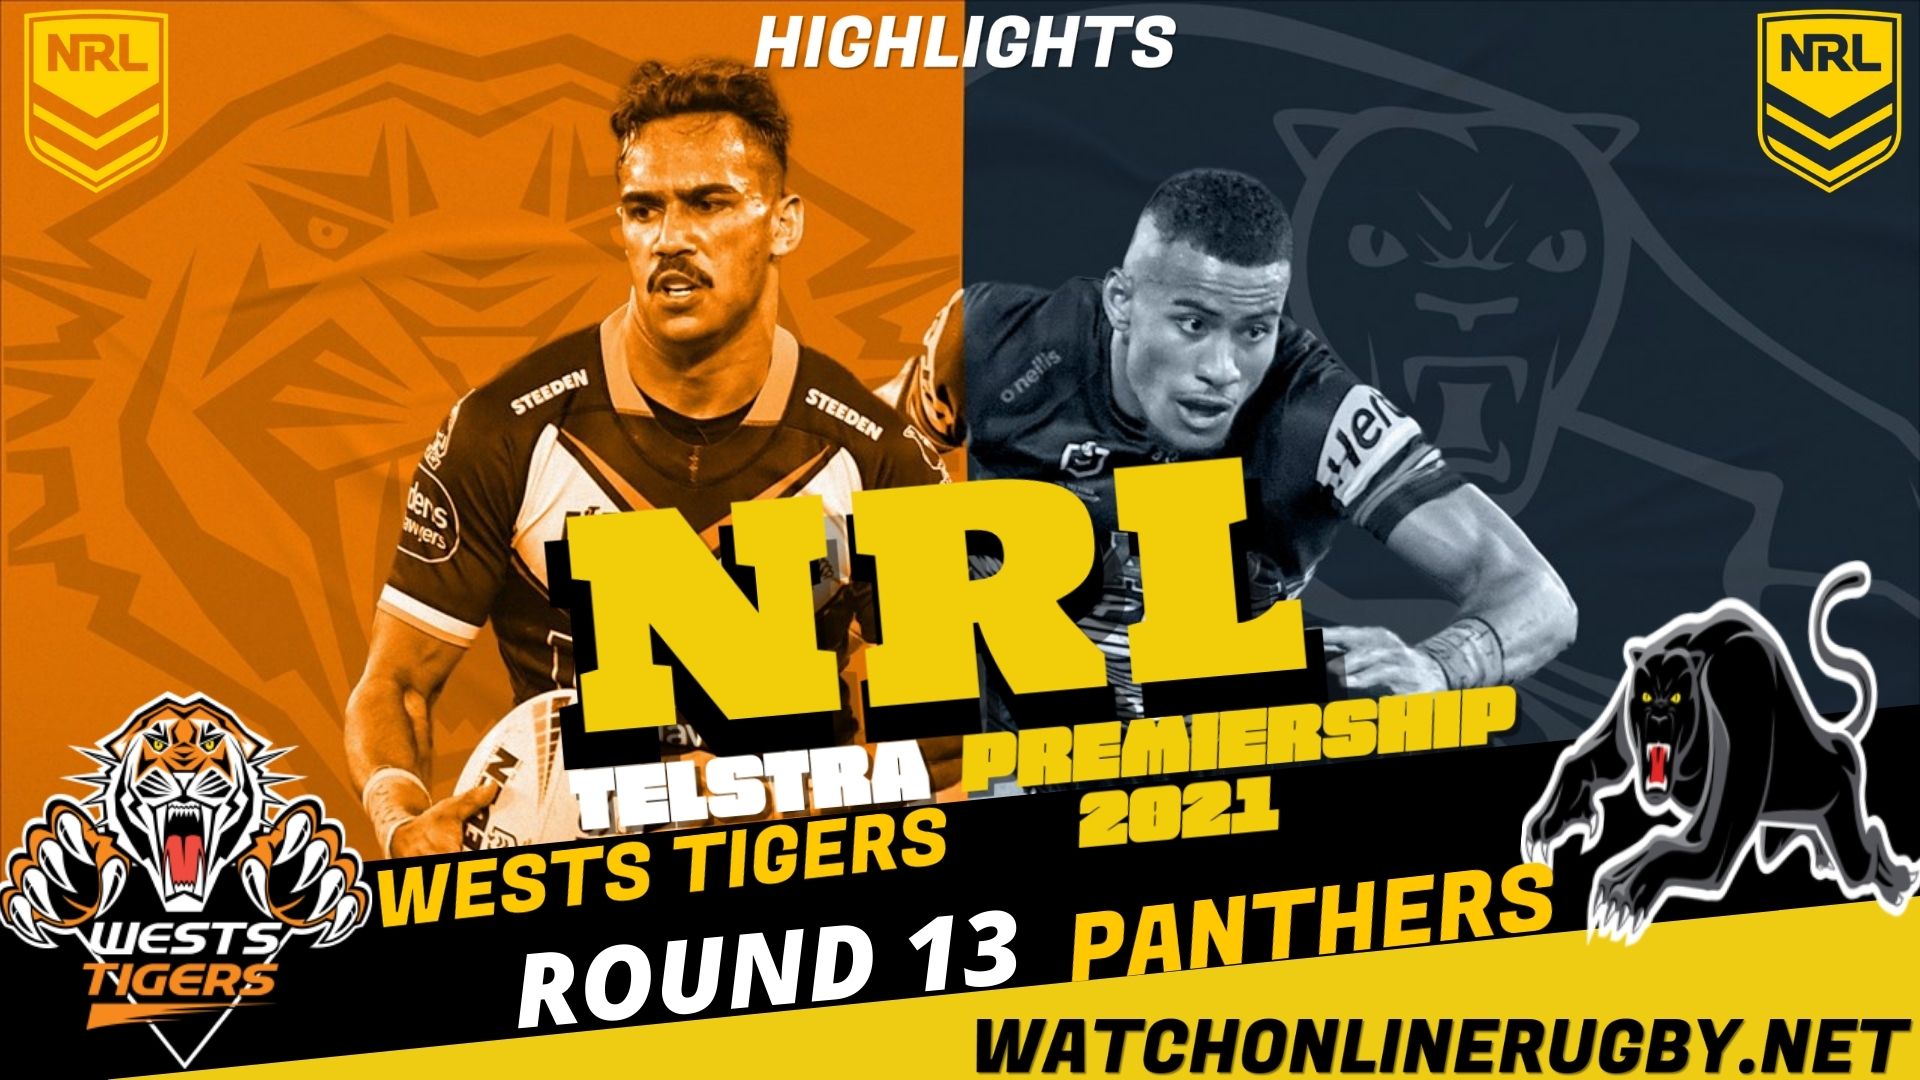 Wests Tigers Vs Panthers Highlights RD 13 NRL Rugby